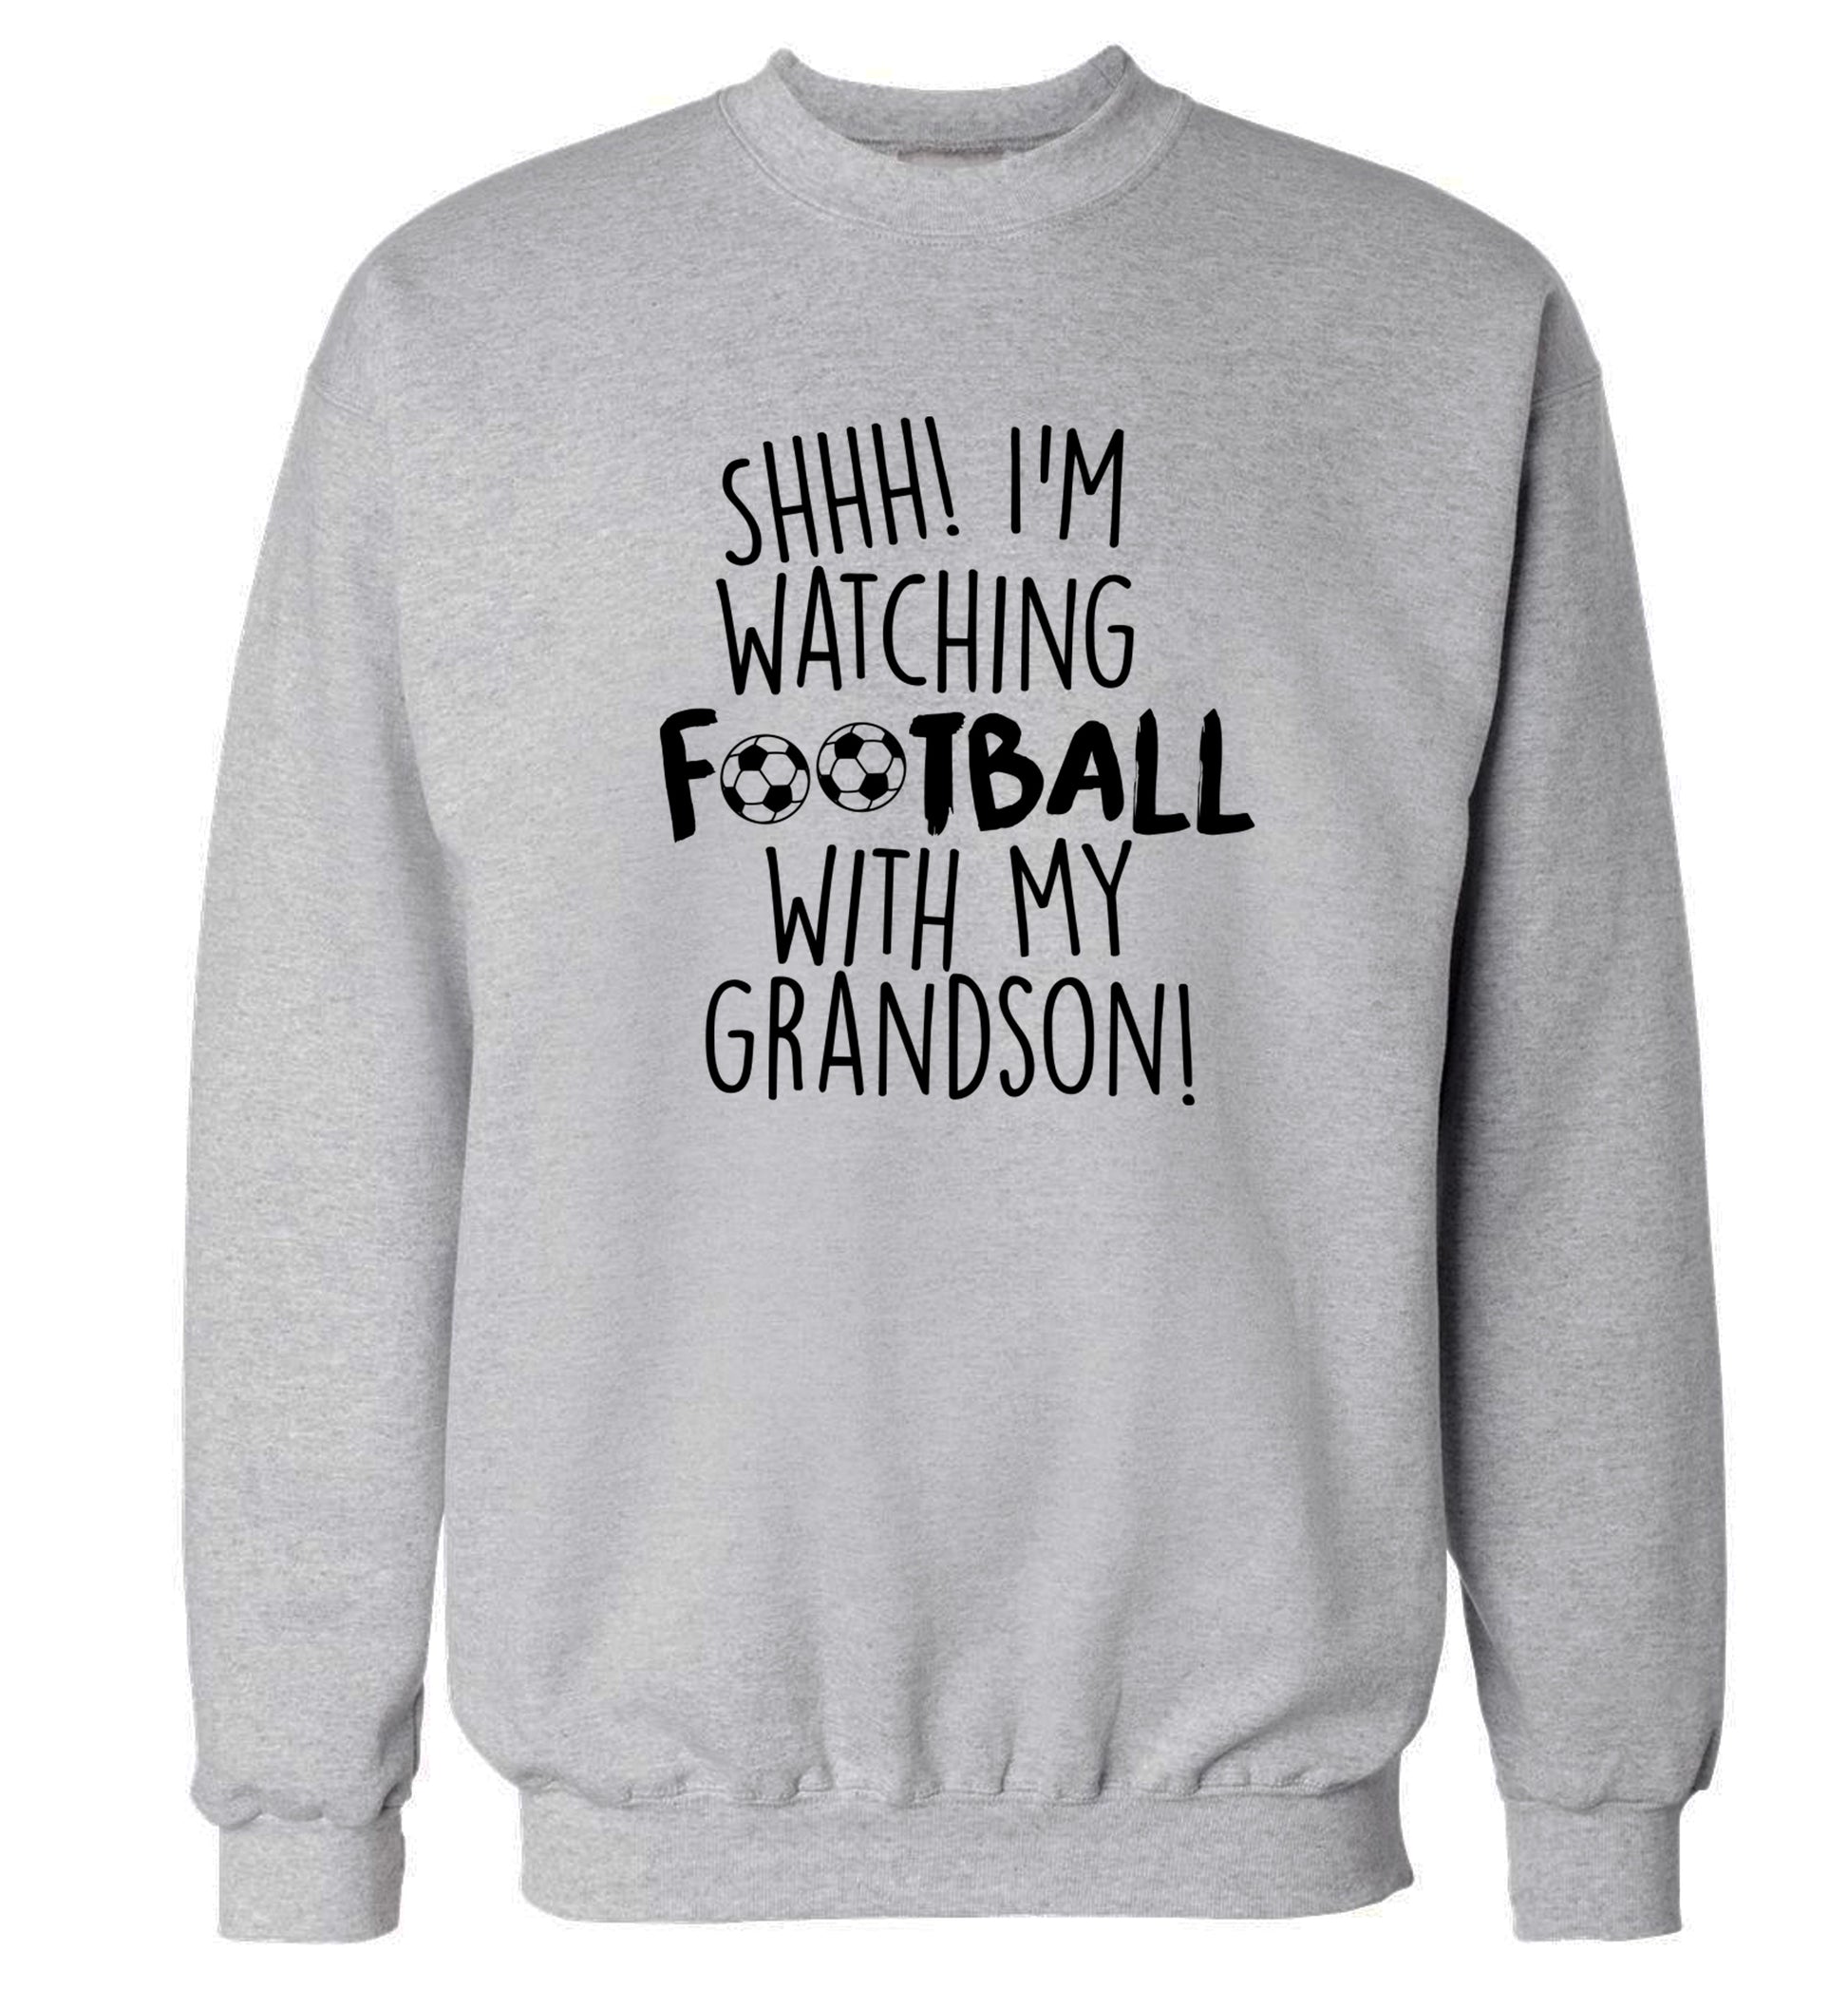 Shhh I'm watching football with my grandson Adult's unisexgrey Sweater 2XL